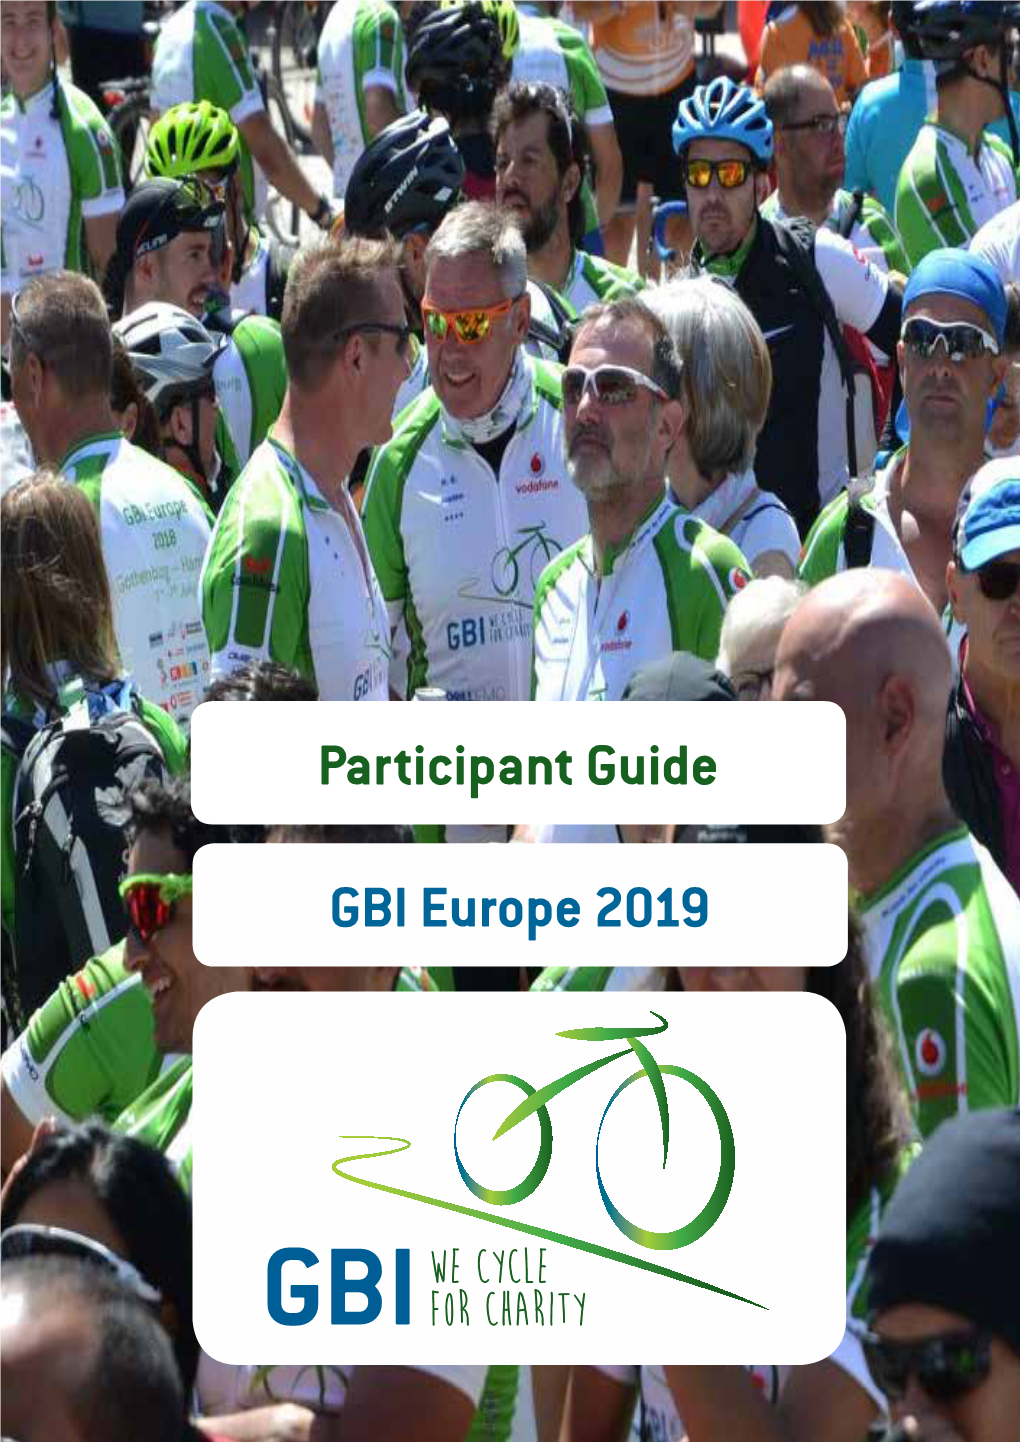 GBI Europe 2019 Dear GBI Participant, in 2019, Following Our Motto “We Cycle for Charity,” We Will Embark on Our 12Th Annual GBI Europe Tour